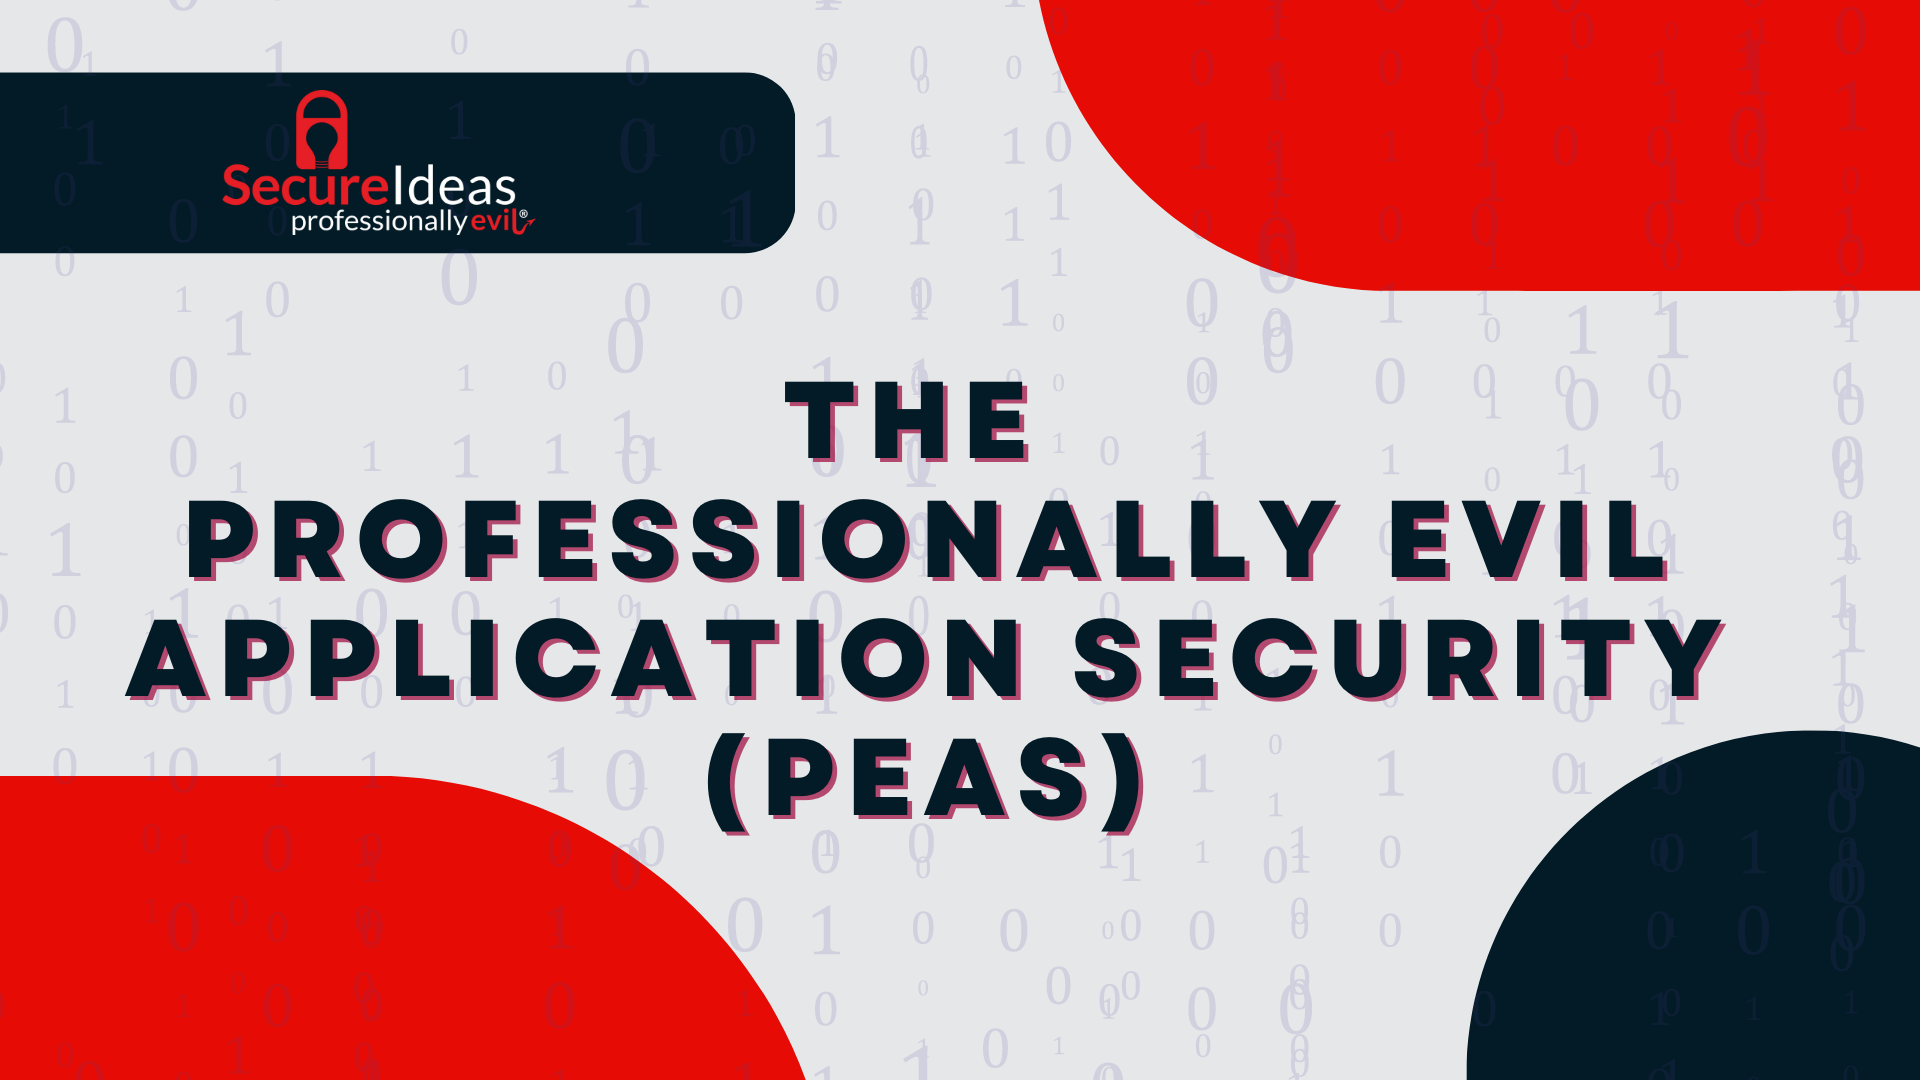 Secure Ideas - The Professionally Evil Application Security (PEAS)